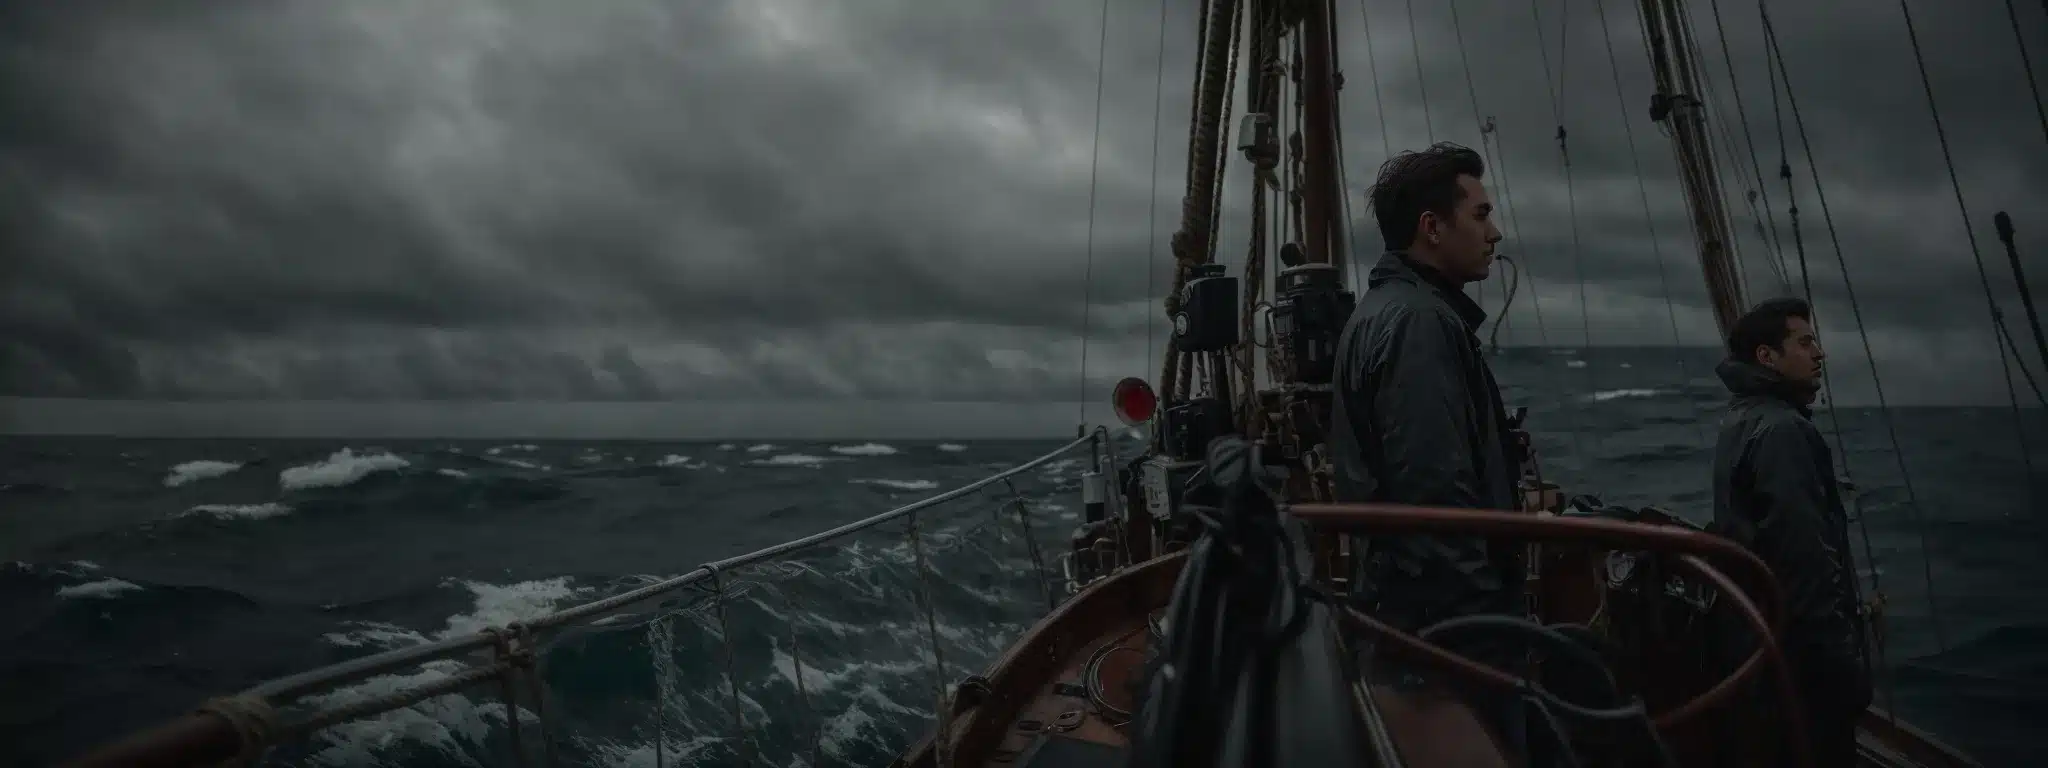 A Strategist Stands At The Helm Of A Ship, Steering Through Stormy Seas With A Steadfast Gaze Towards The Horizon.